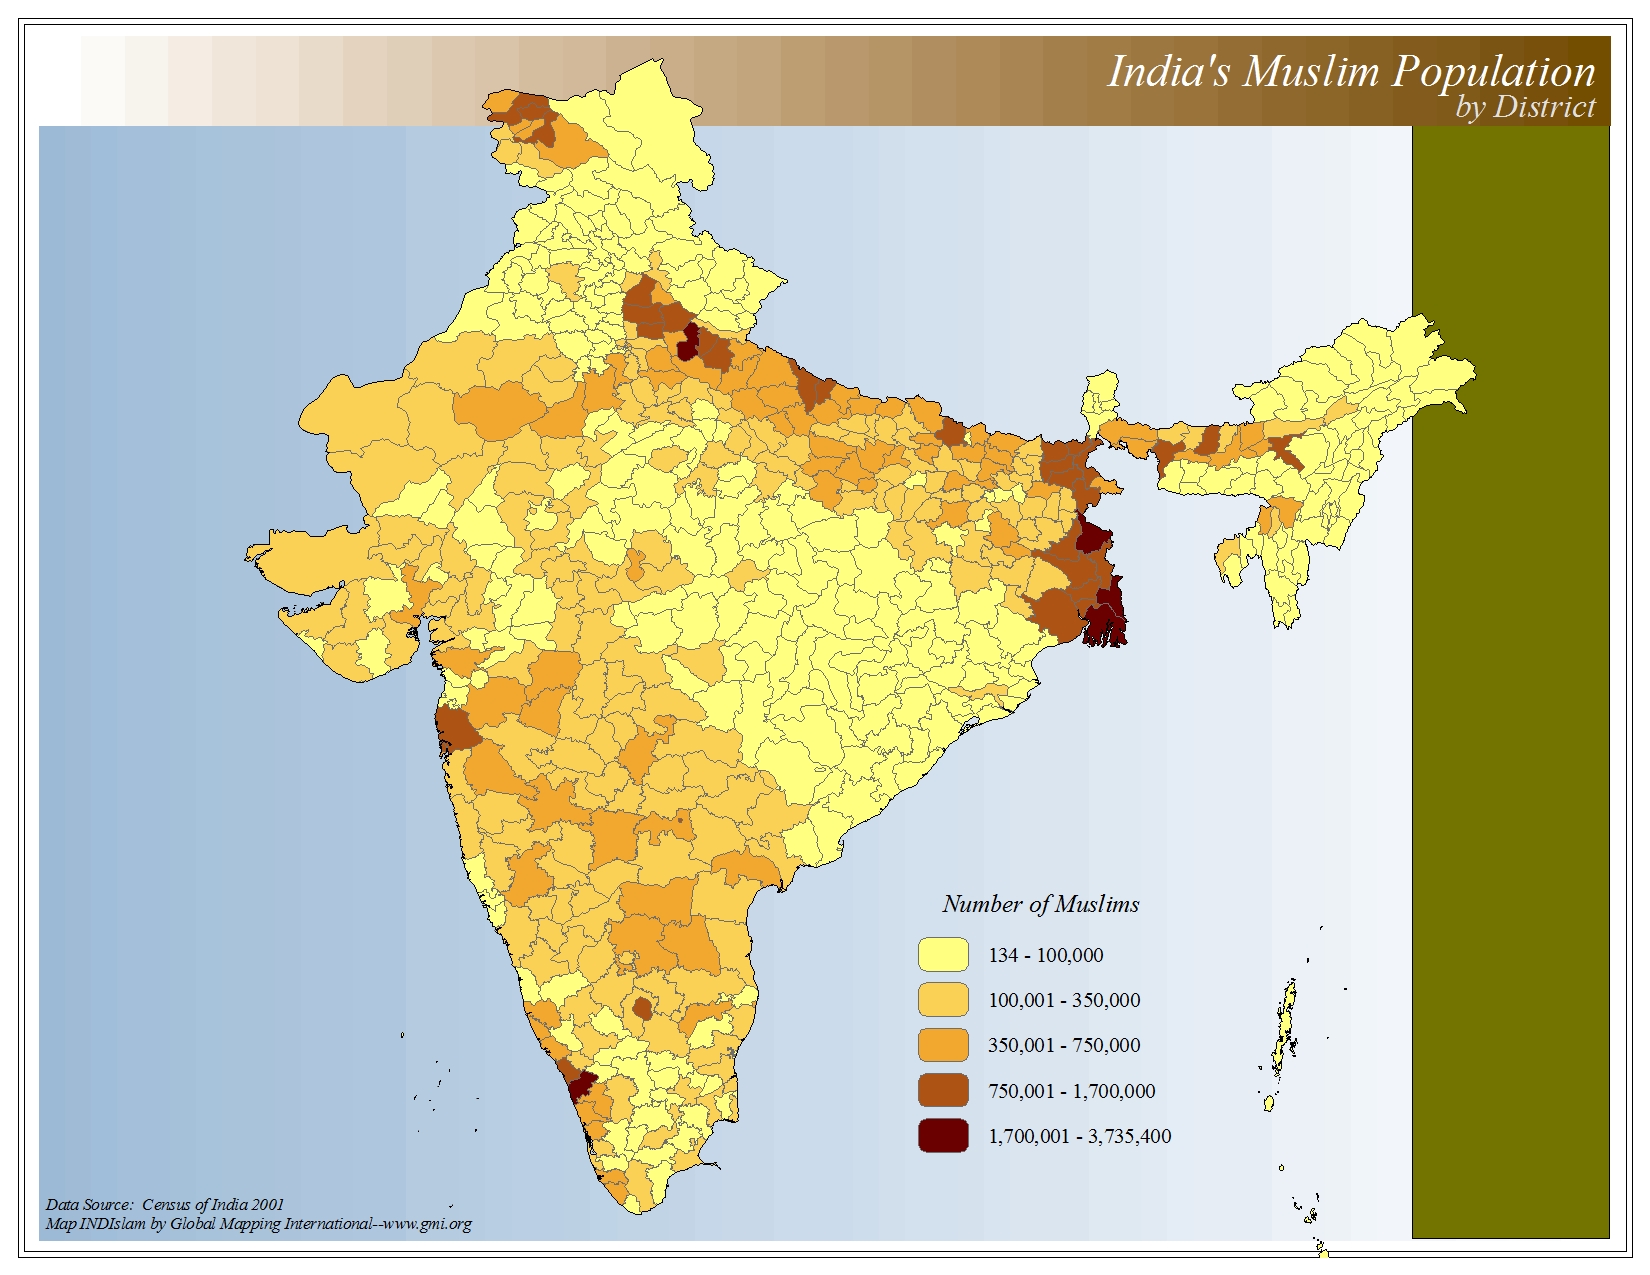 India's Muslim Population by District